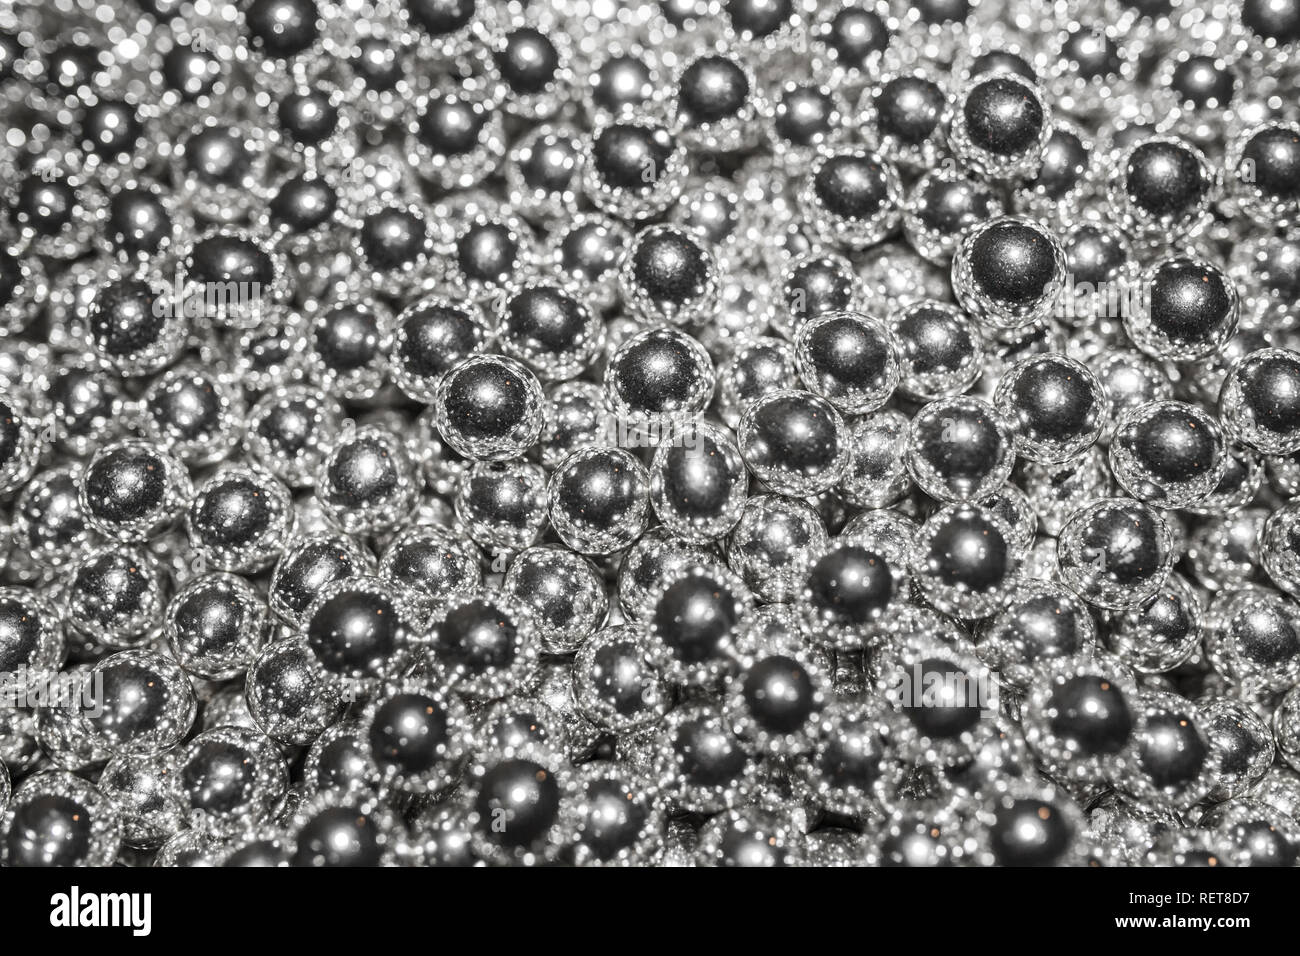 Sprinkles silver ball, cake decorations candy texture Stock Photo